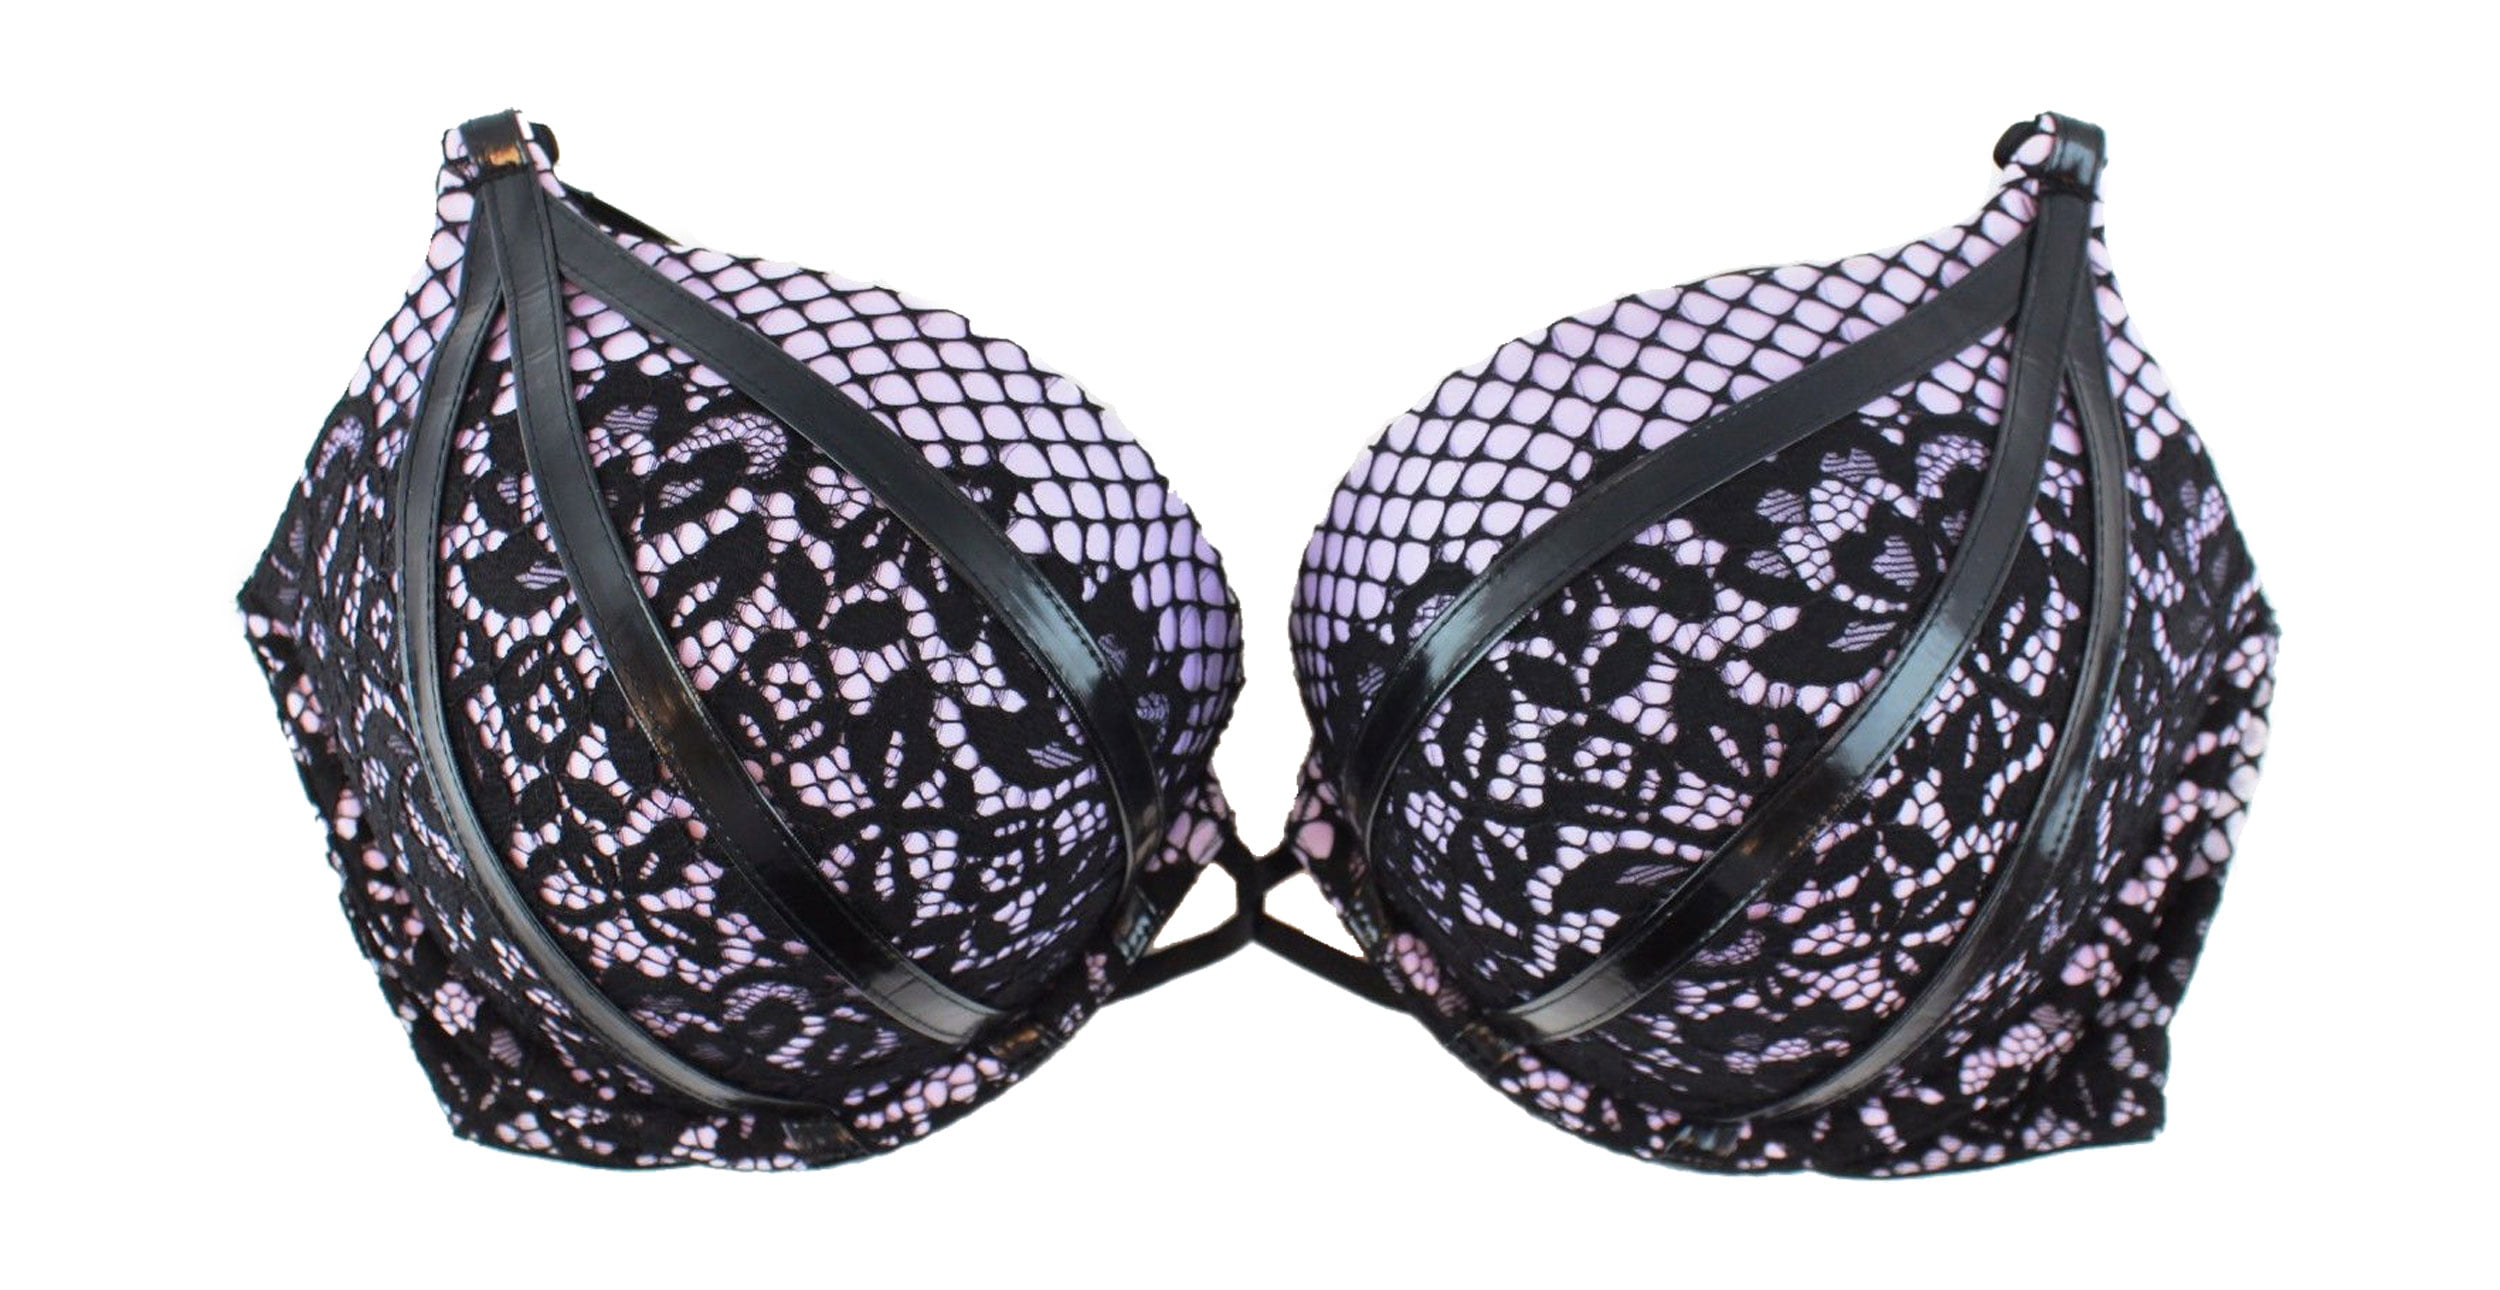 Free: Victoria Secret Bombshell Miraculous Plunge adds 2 cup sz 38D Leopard  Bra FREE SHIP w Gin - Other Women's Clothing -  Auctions for Free  Stuff